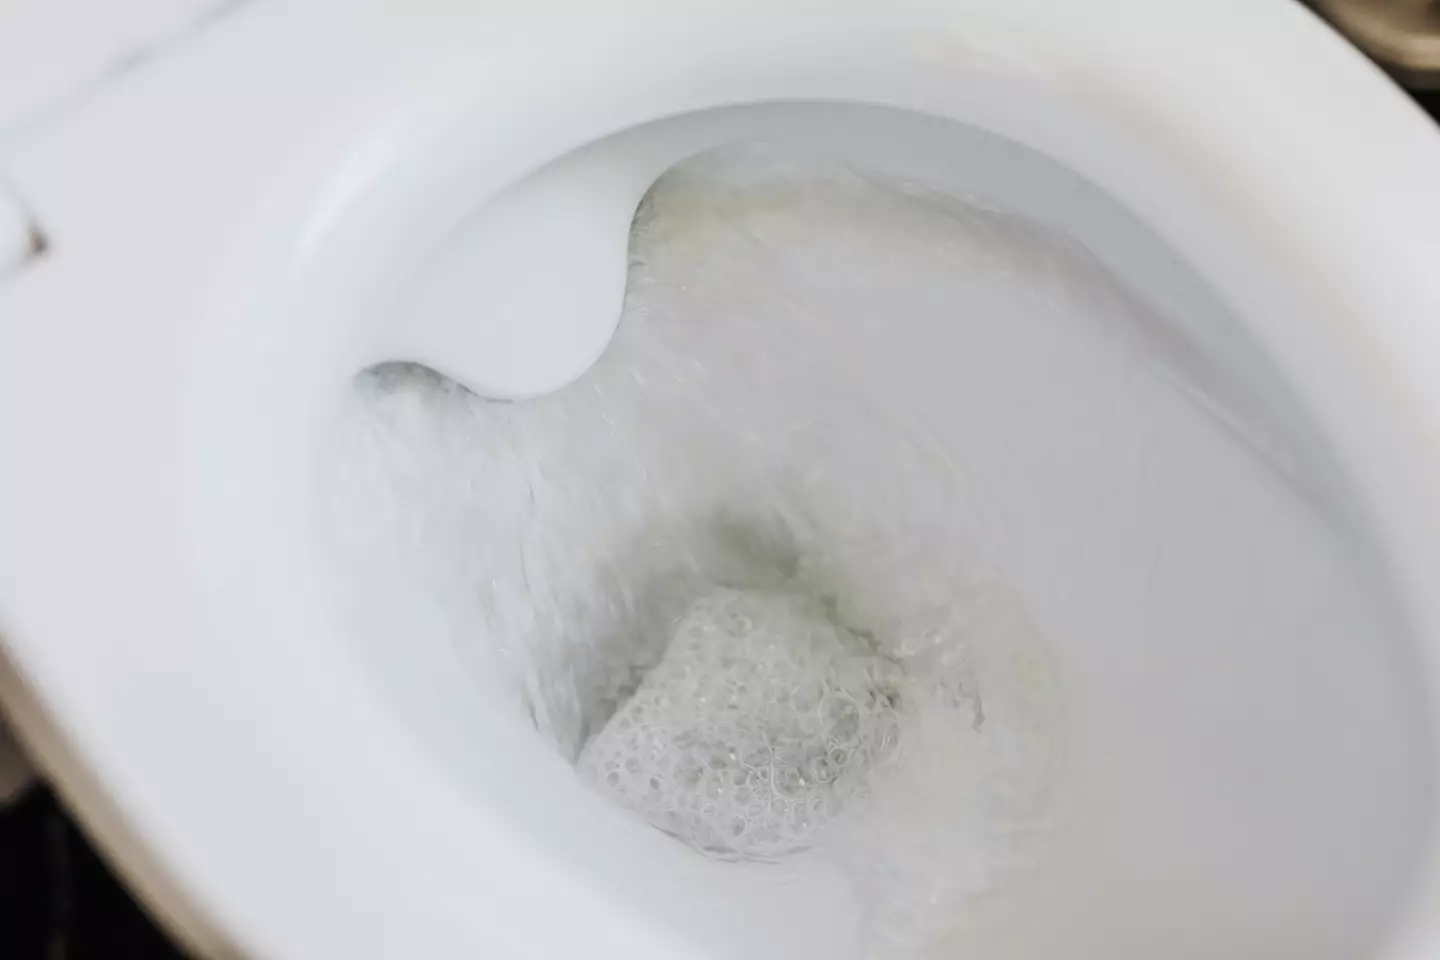 Have you ever flushed your pet's faeces down the toilet?